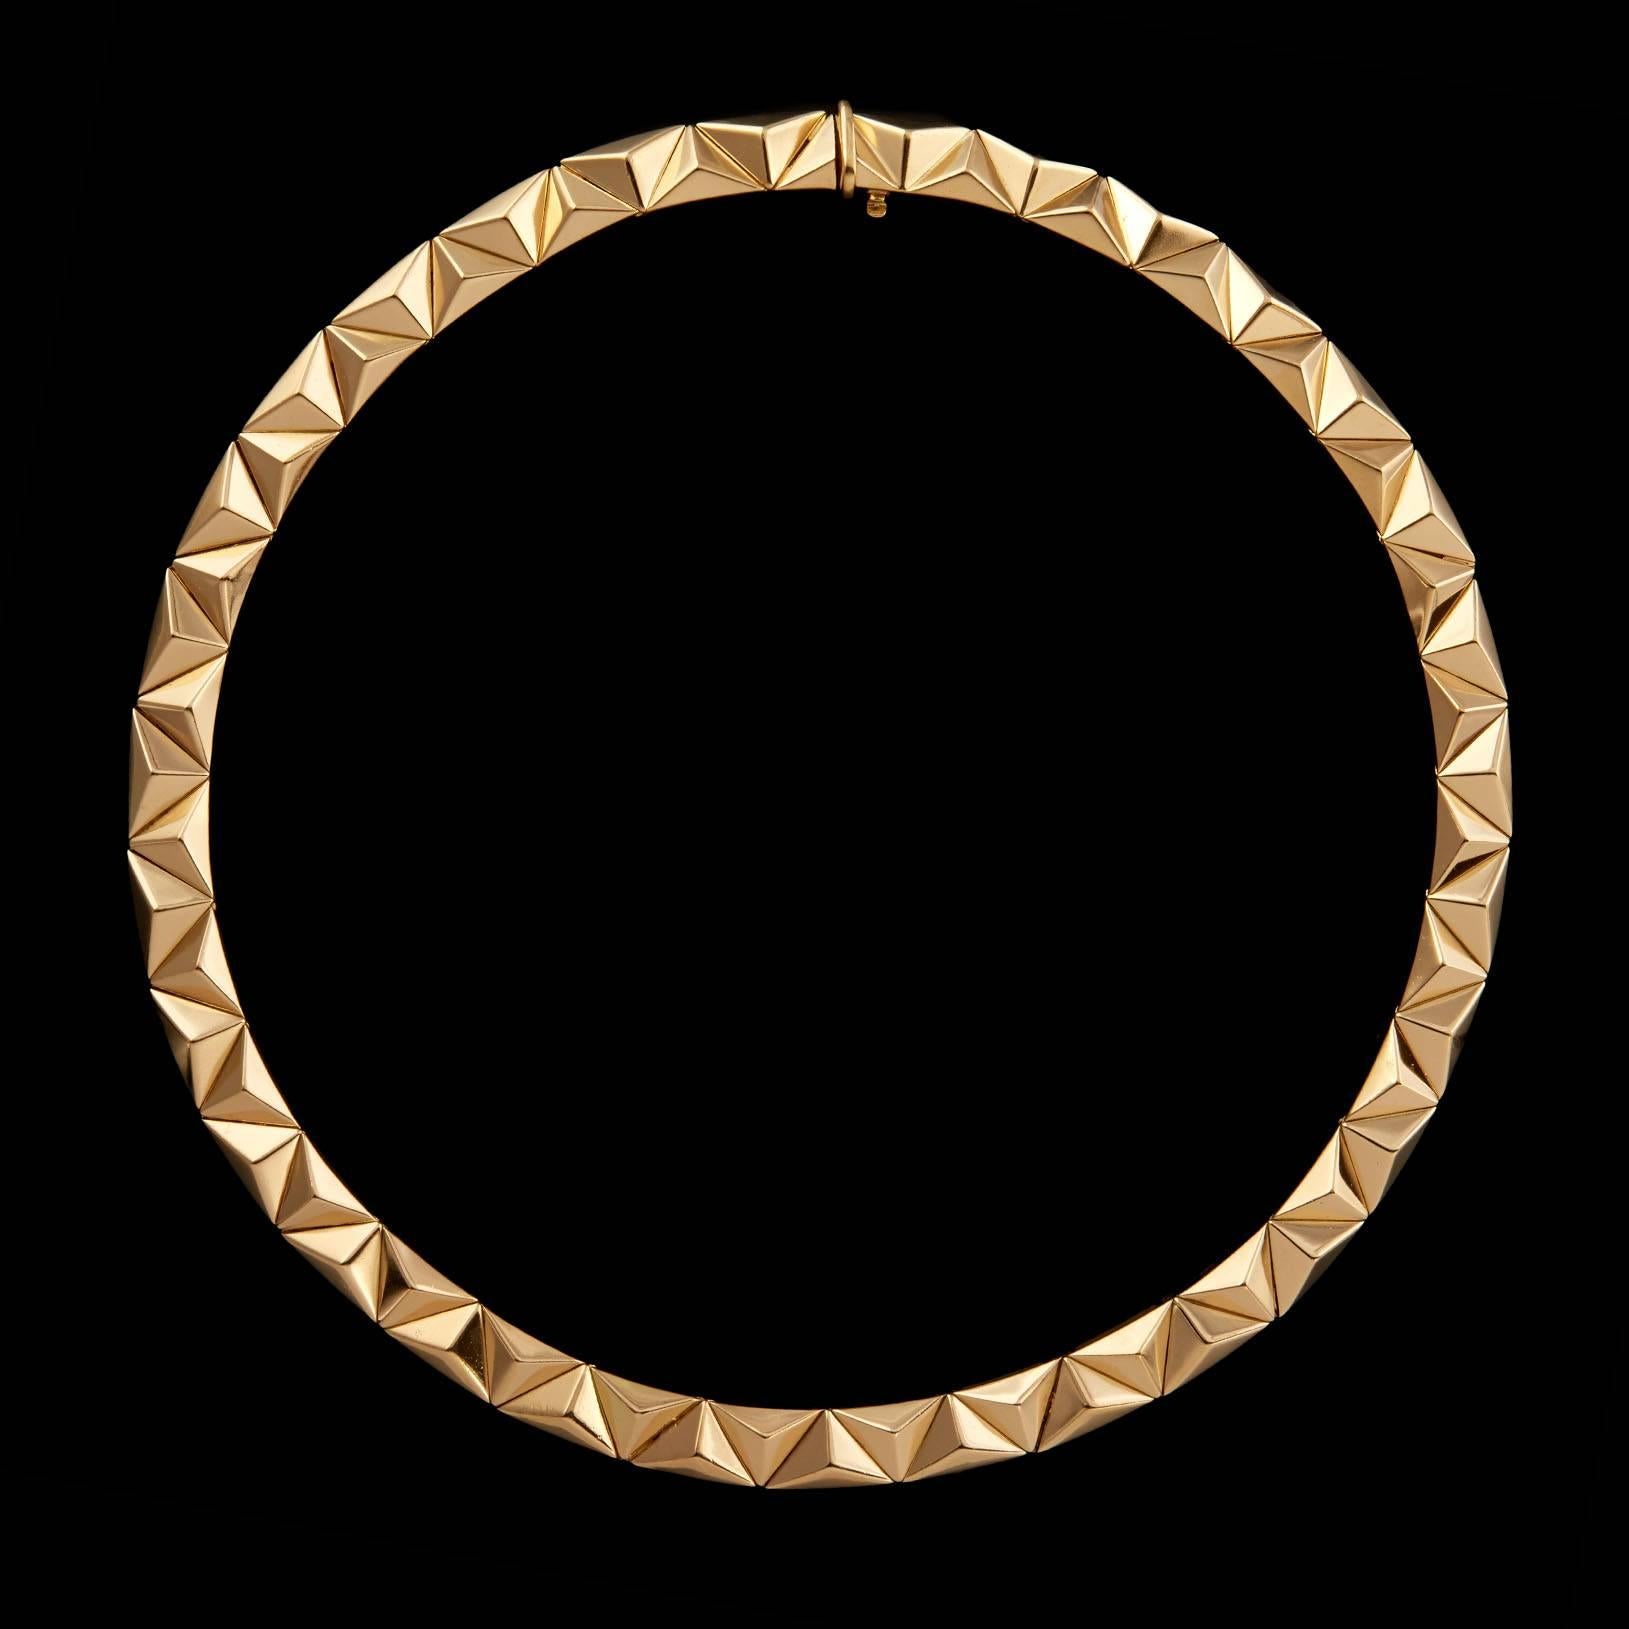 Bulgari 18Kt Yellow Gold Raised Triangular Link Choker Necklace. This necklace is 15 inches in length and 7.5mm in width. The weight is 88.0 grams.